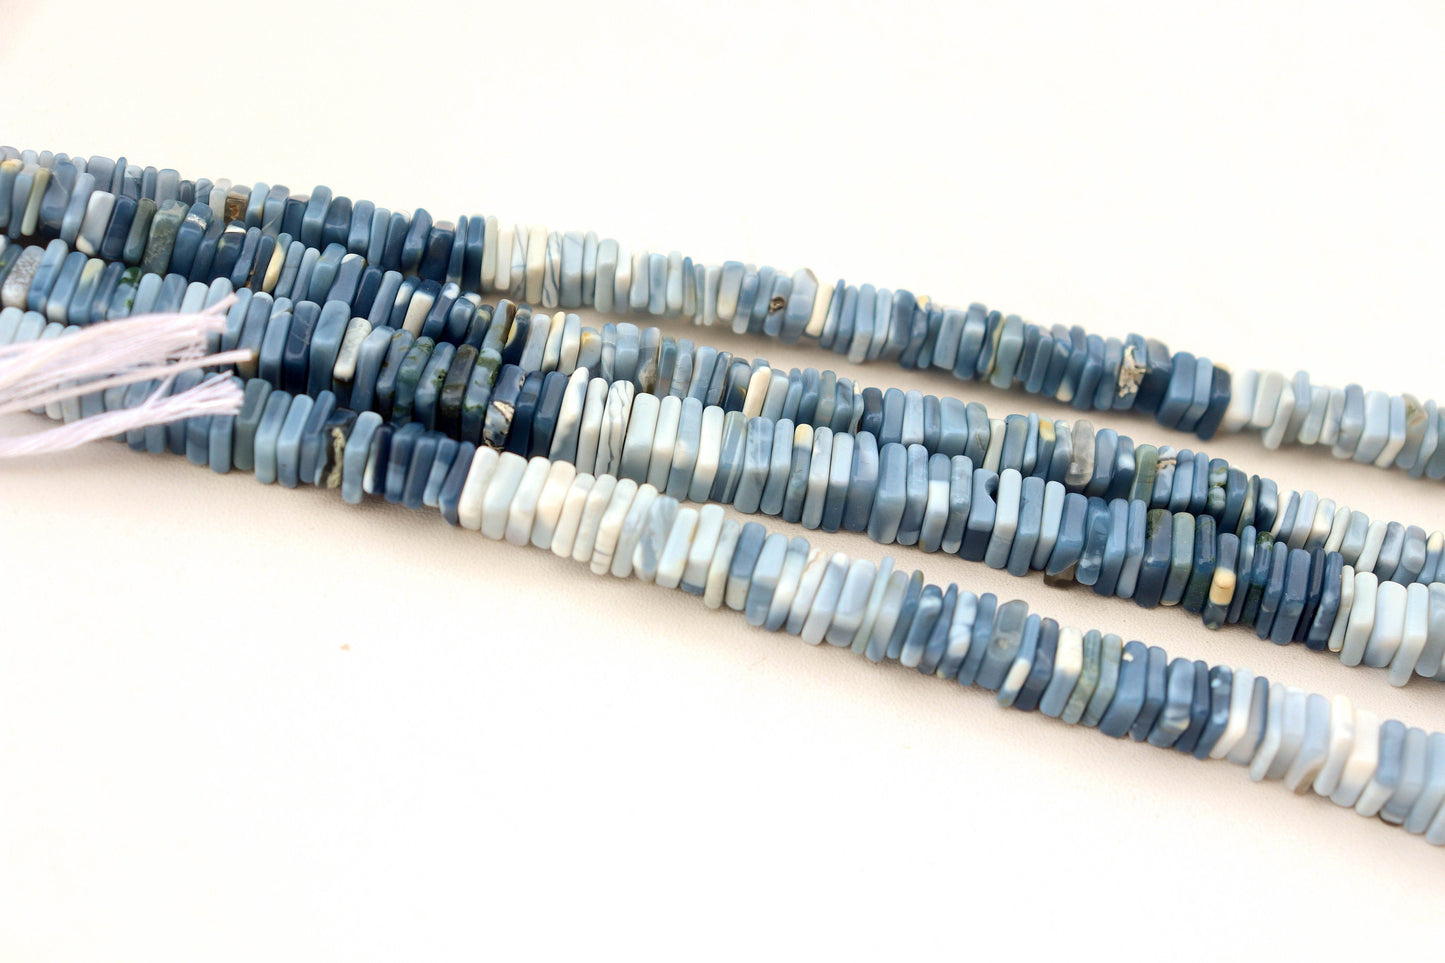 Blue Lace Agate Beads Smooth Square shape Heishi beads, 8mm, Blue lace agate beads,  Agate Gemstone beads for Jewelry making Beadsforyourjewelry